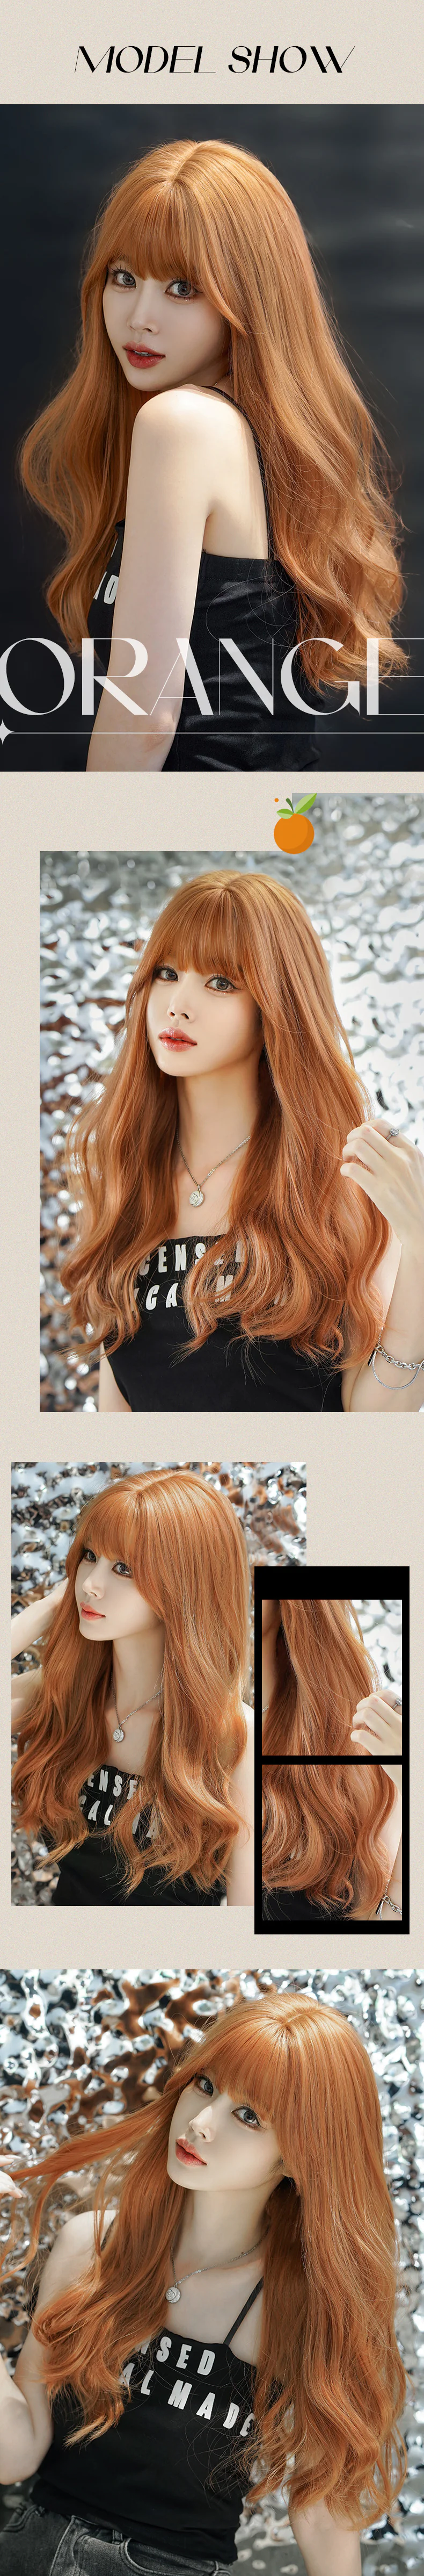 Orange-Synthetic-Hair-Party-Anime-Cosplay-Long-Wavy-Wig-with-Bangs10